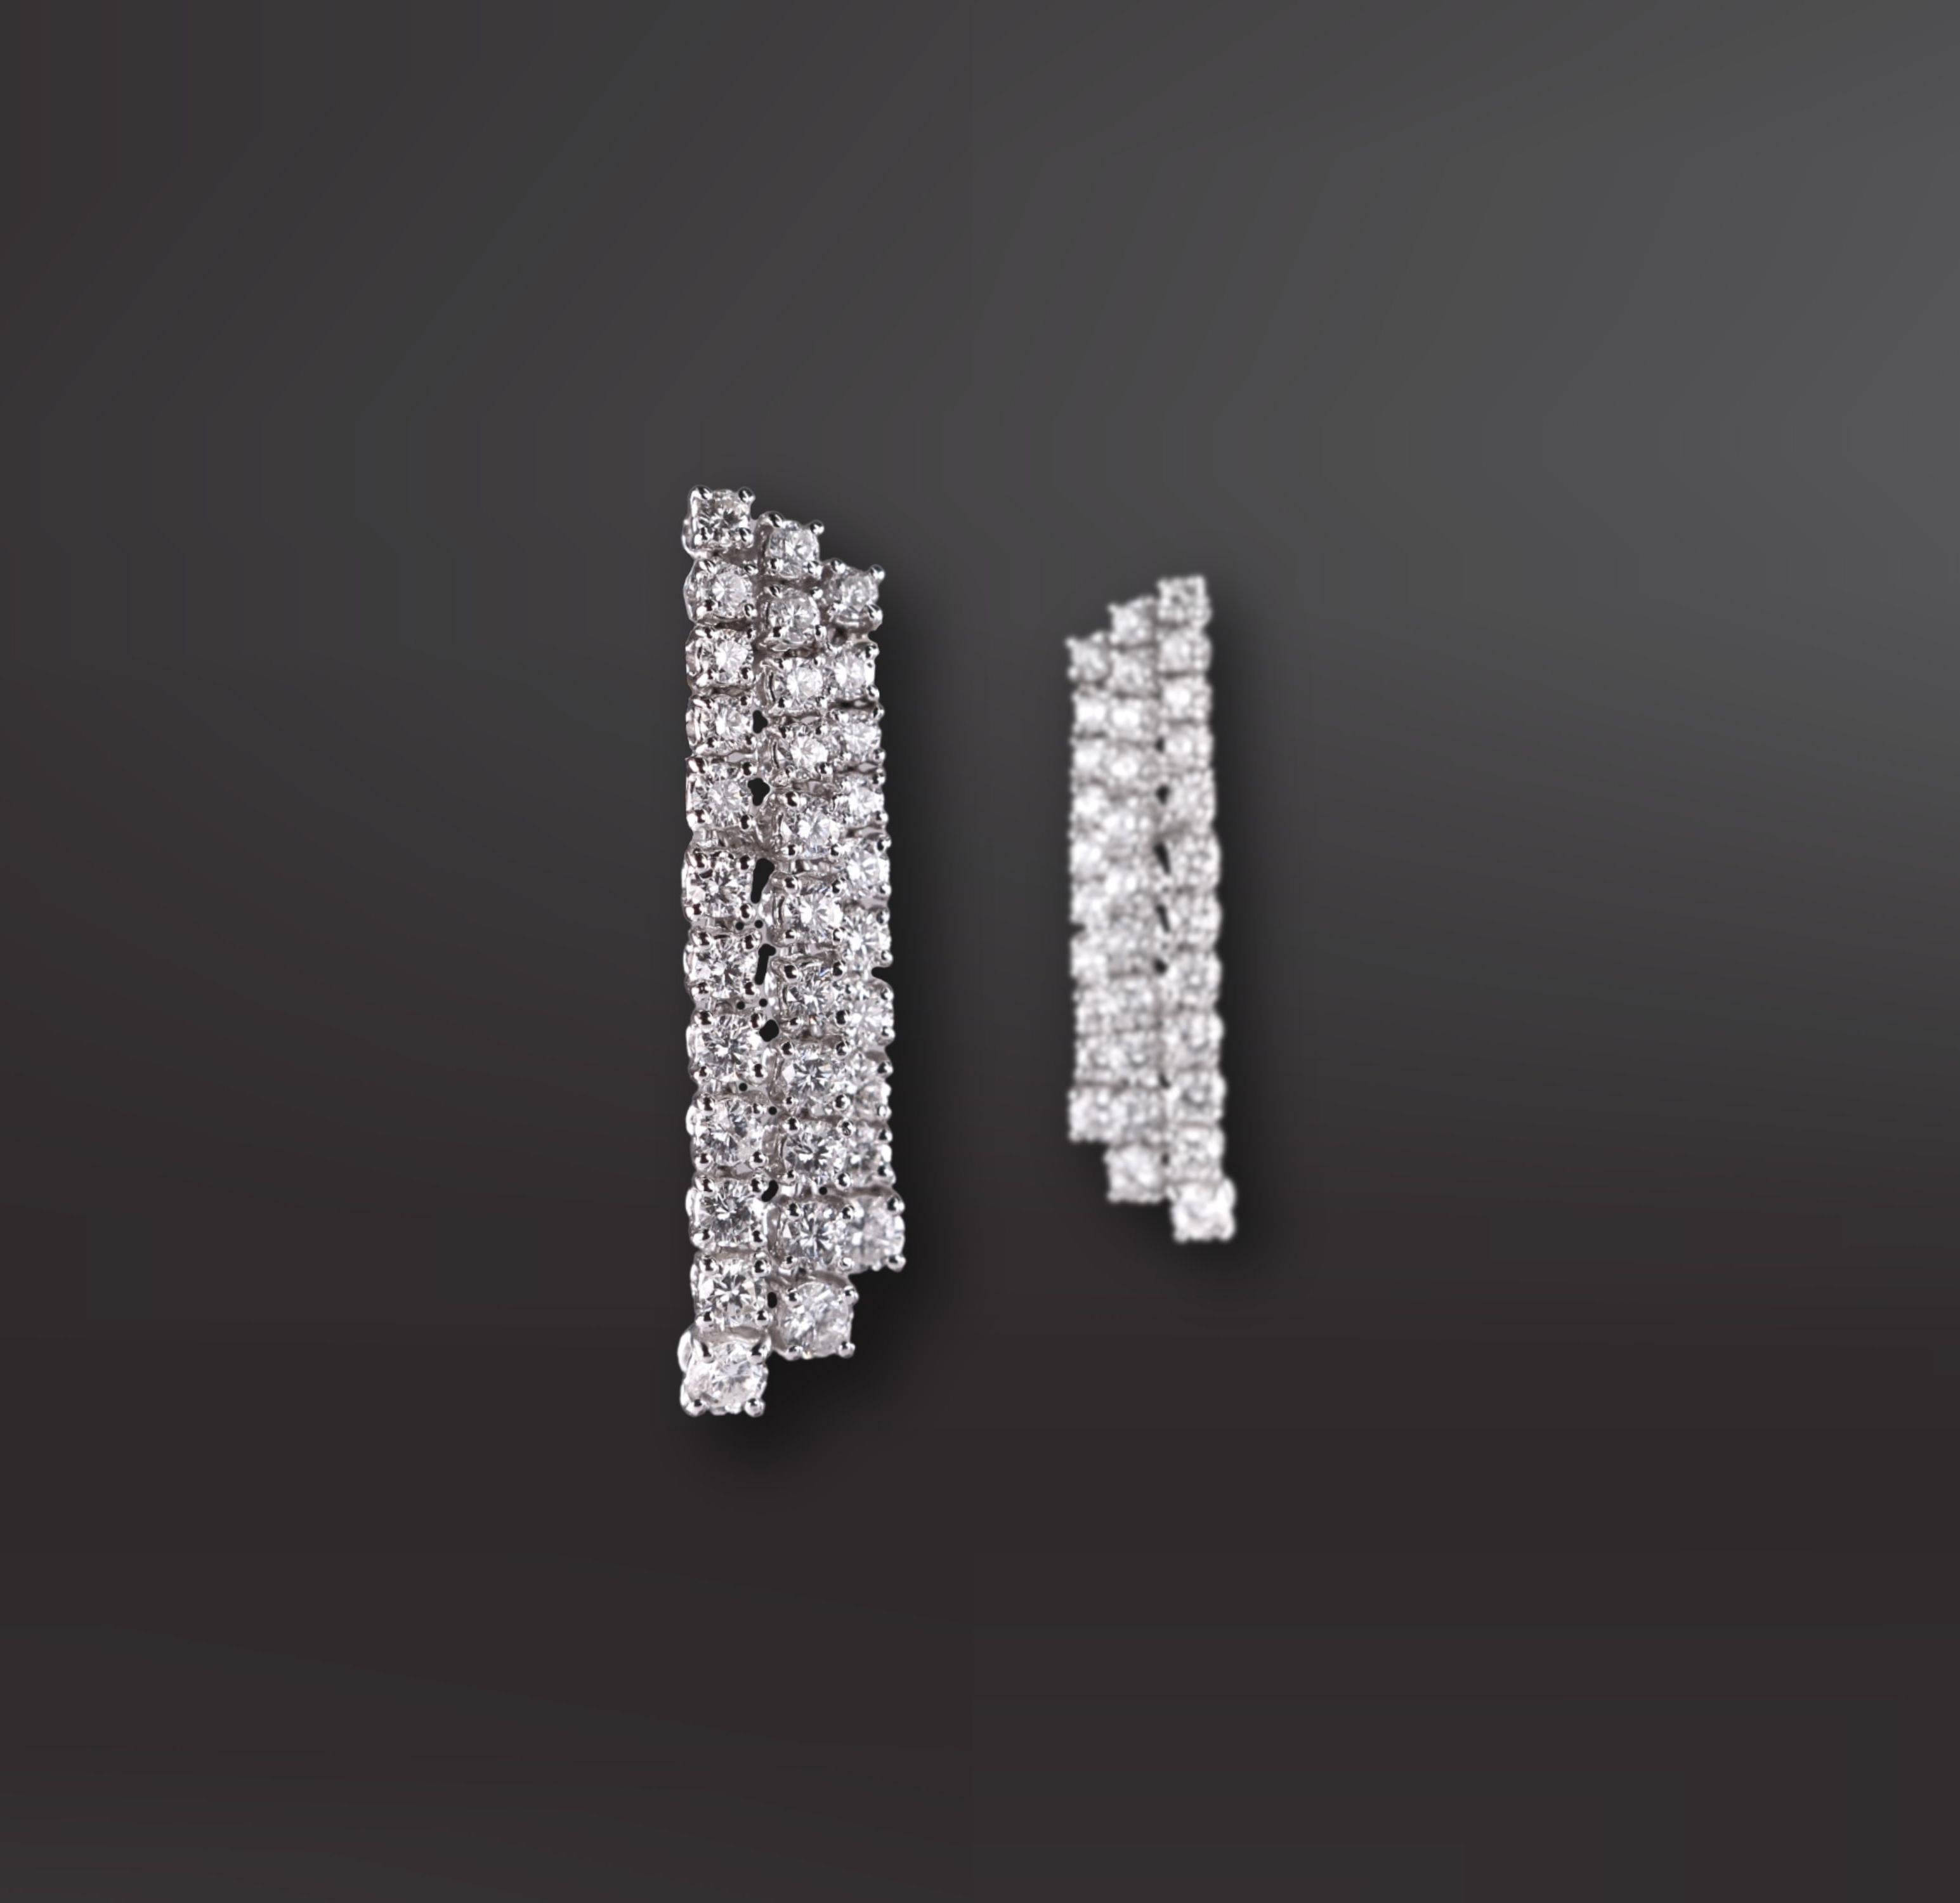 Sparkling Cascade: Earrings with 4.21ct of Brilliant Round Diamonds For Sale 1